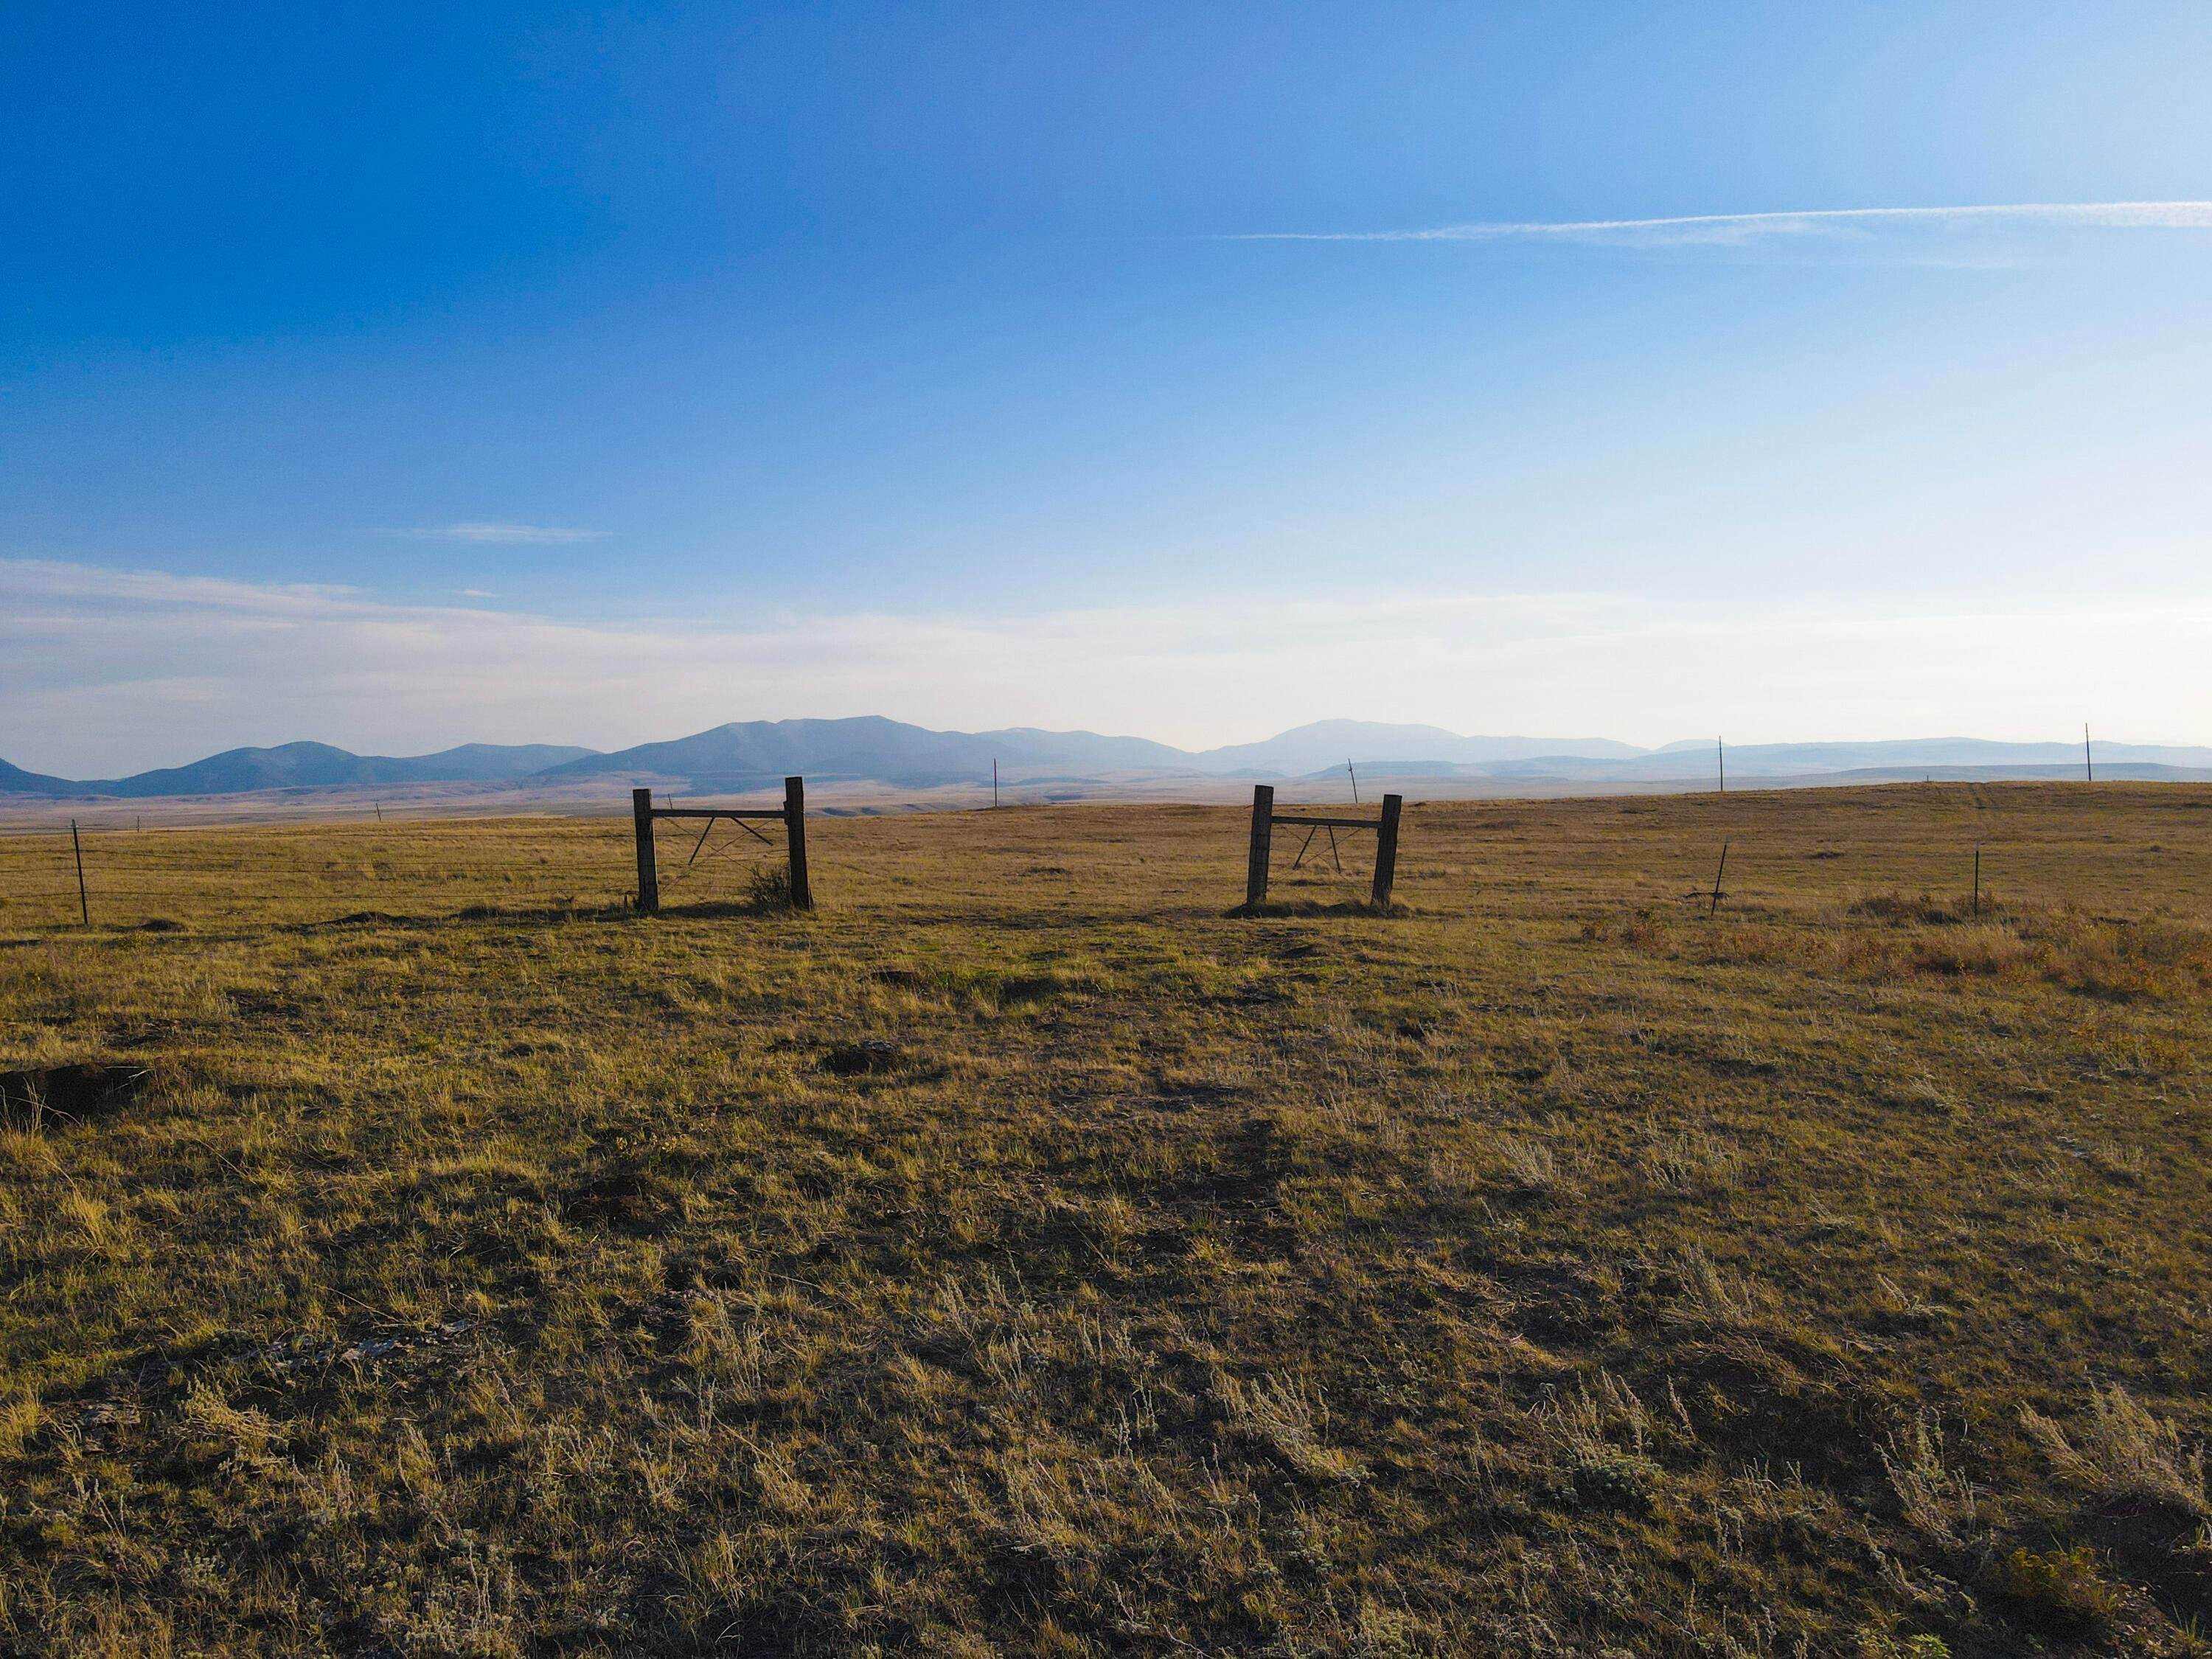 Farm / Agriculture for Sale at Tbd Spion Kop Road, Geyser, Montana 59447 United States